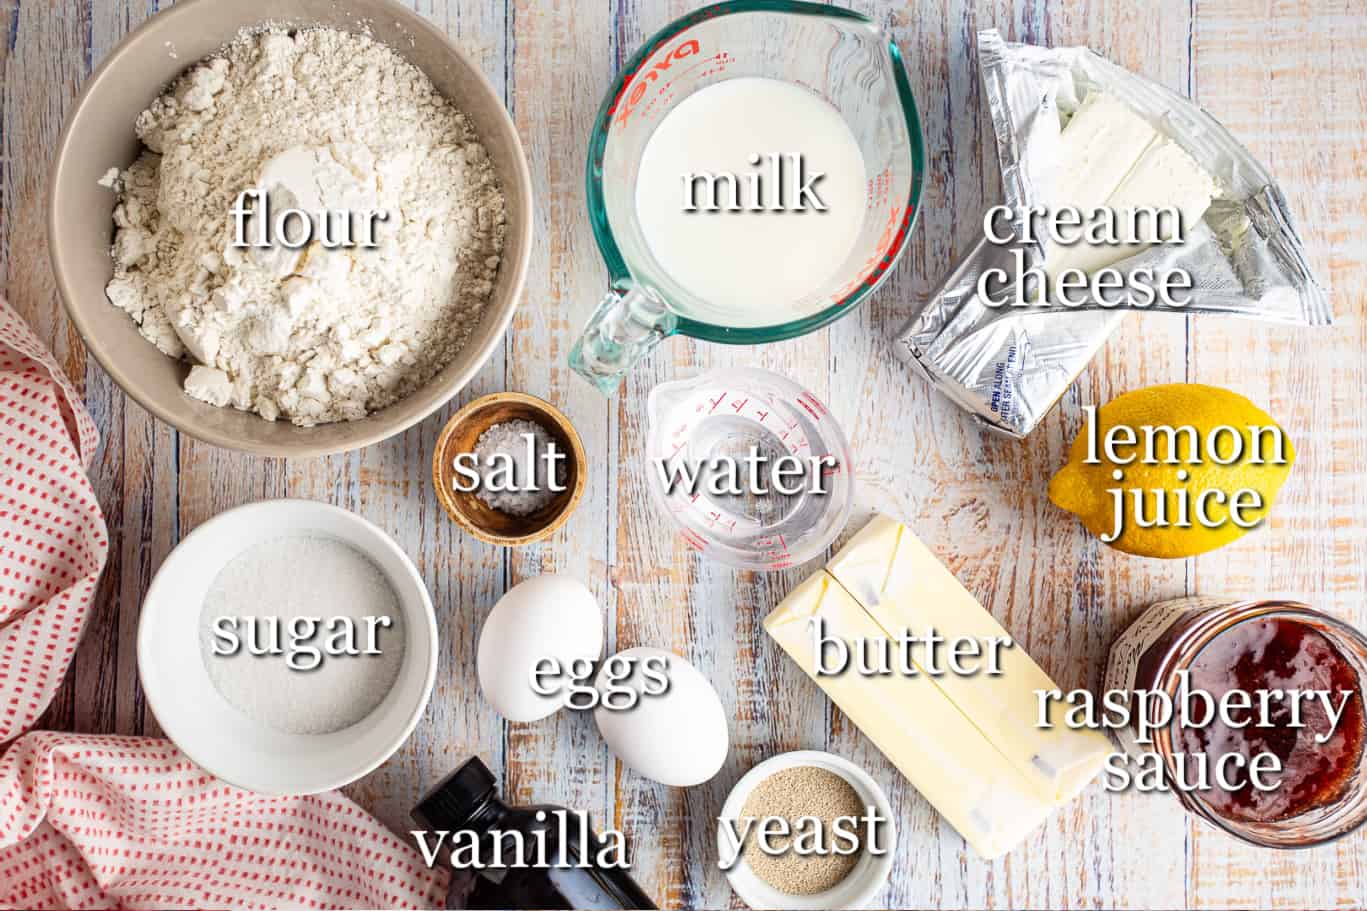 Ingredients for making cheese Danish, with text labels.